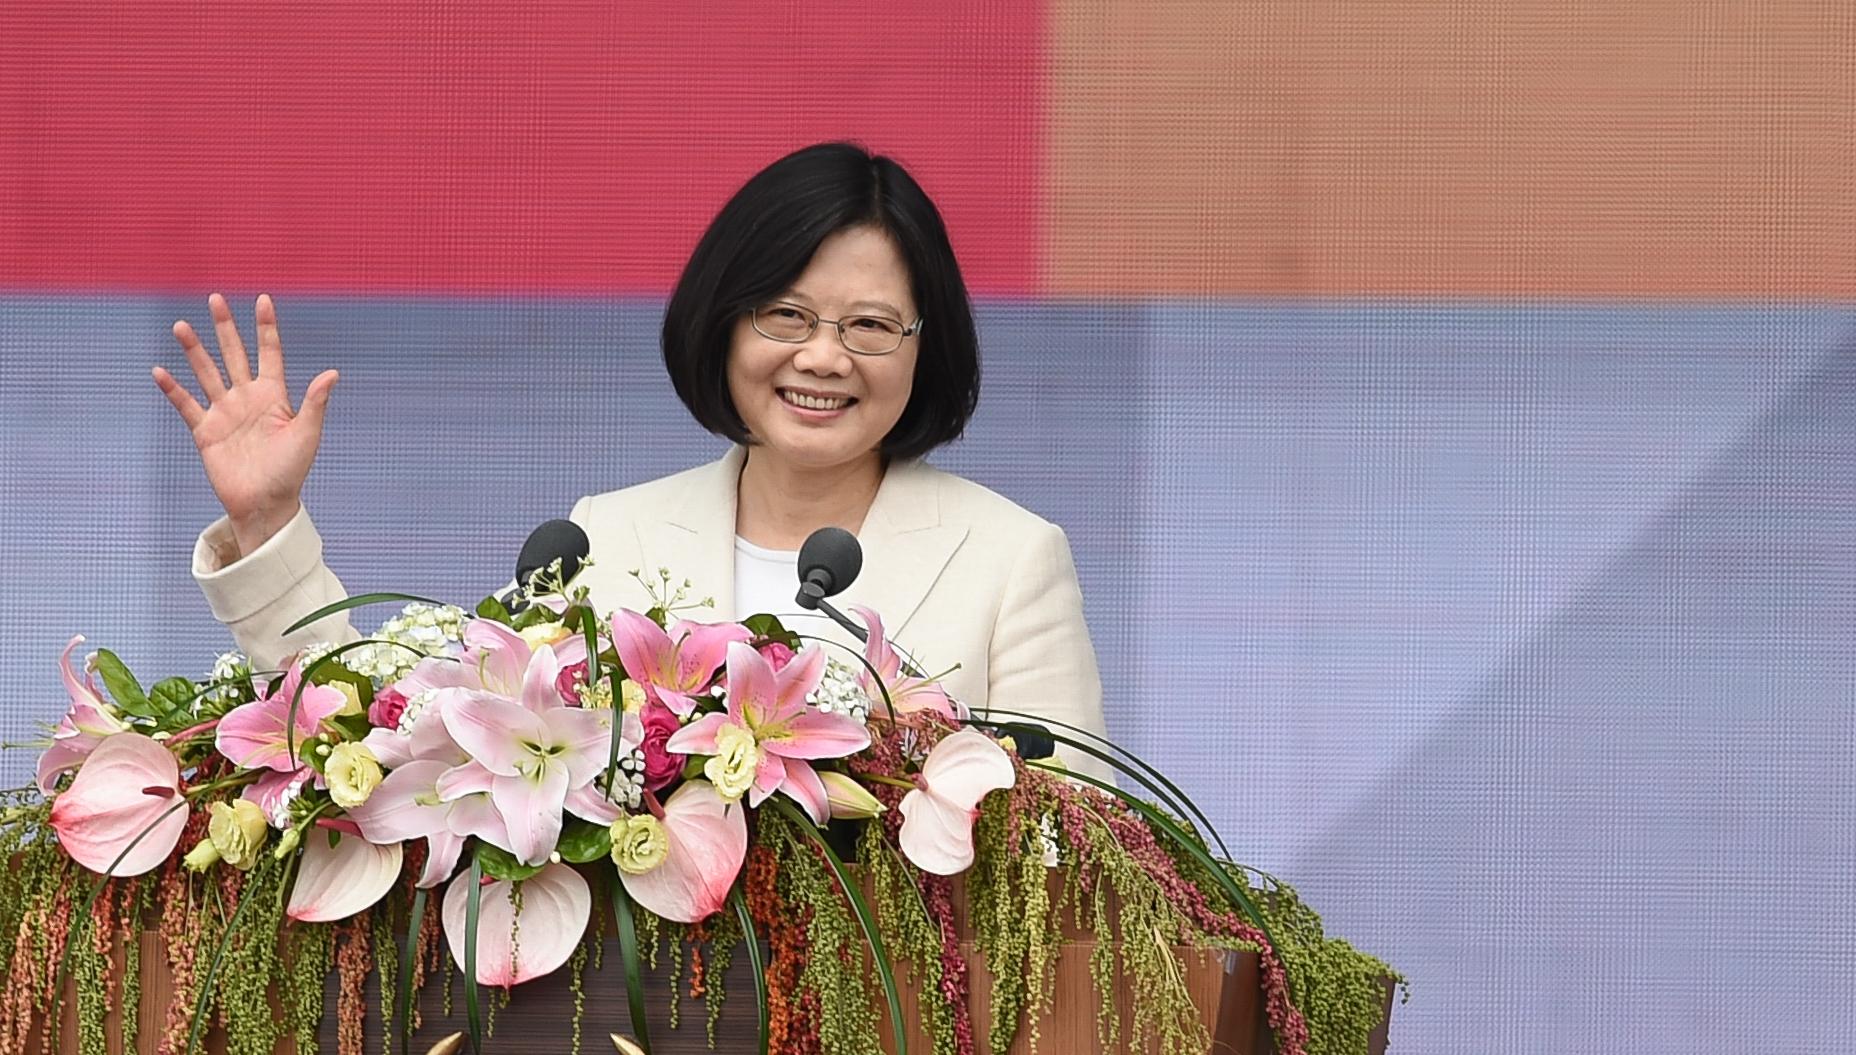 President Tsai Ing-wen waves to well-wishers following her inaugural address May 20 in Taipei City. (Taipei Photojournalists Association)